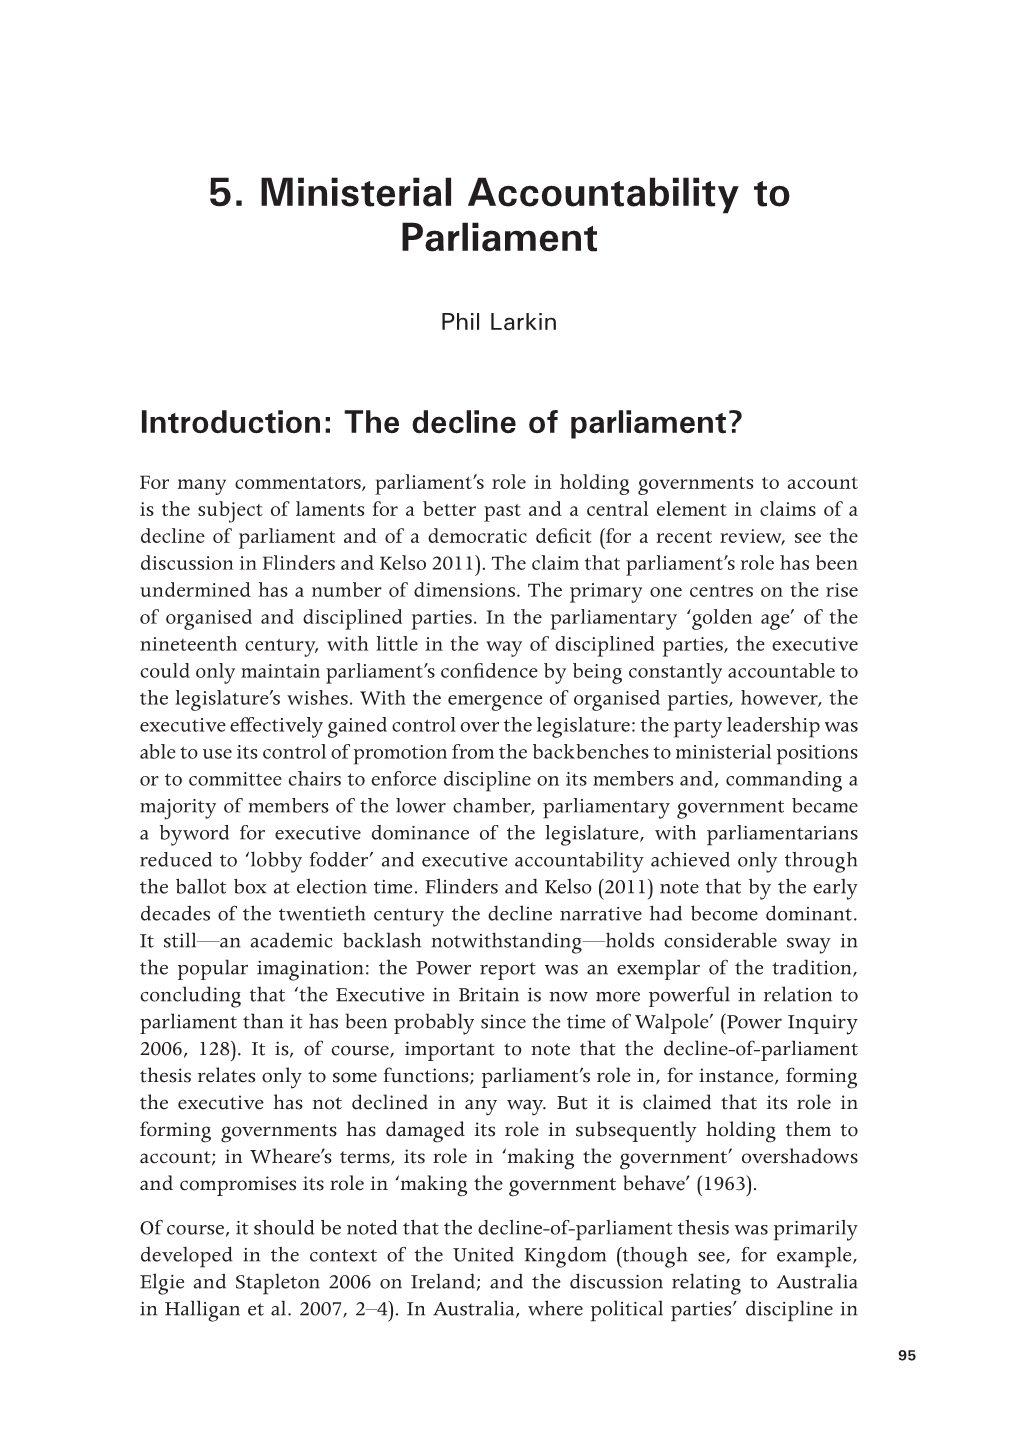 5. Ministerial Accountability to Parliament